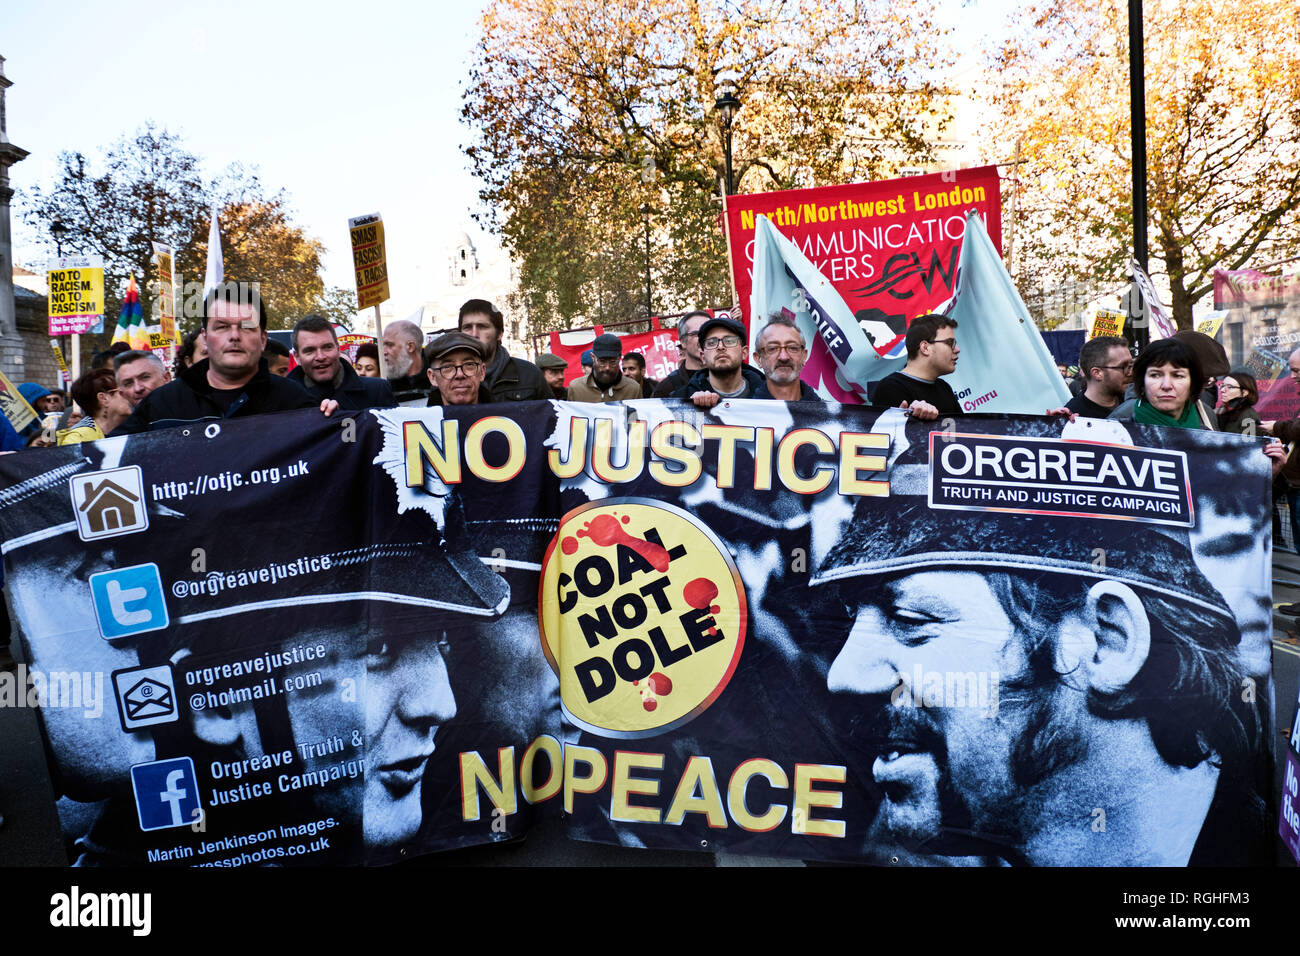 Coal not Dole, Orgreave Truth and Justice Campaign marching through central London on anti-racism march 2018 Stock Photo